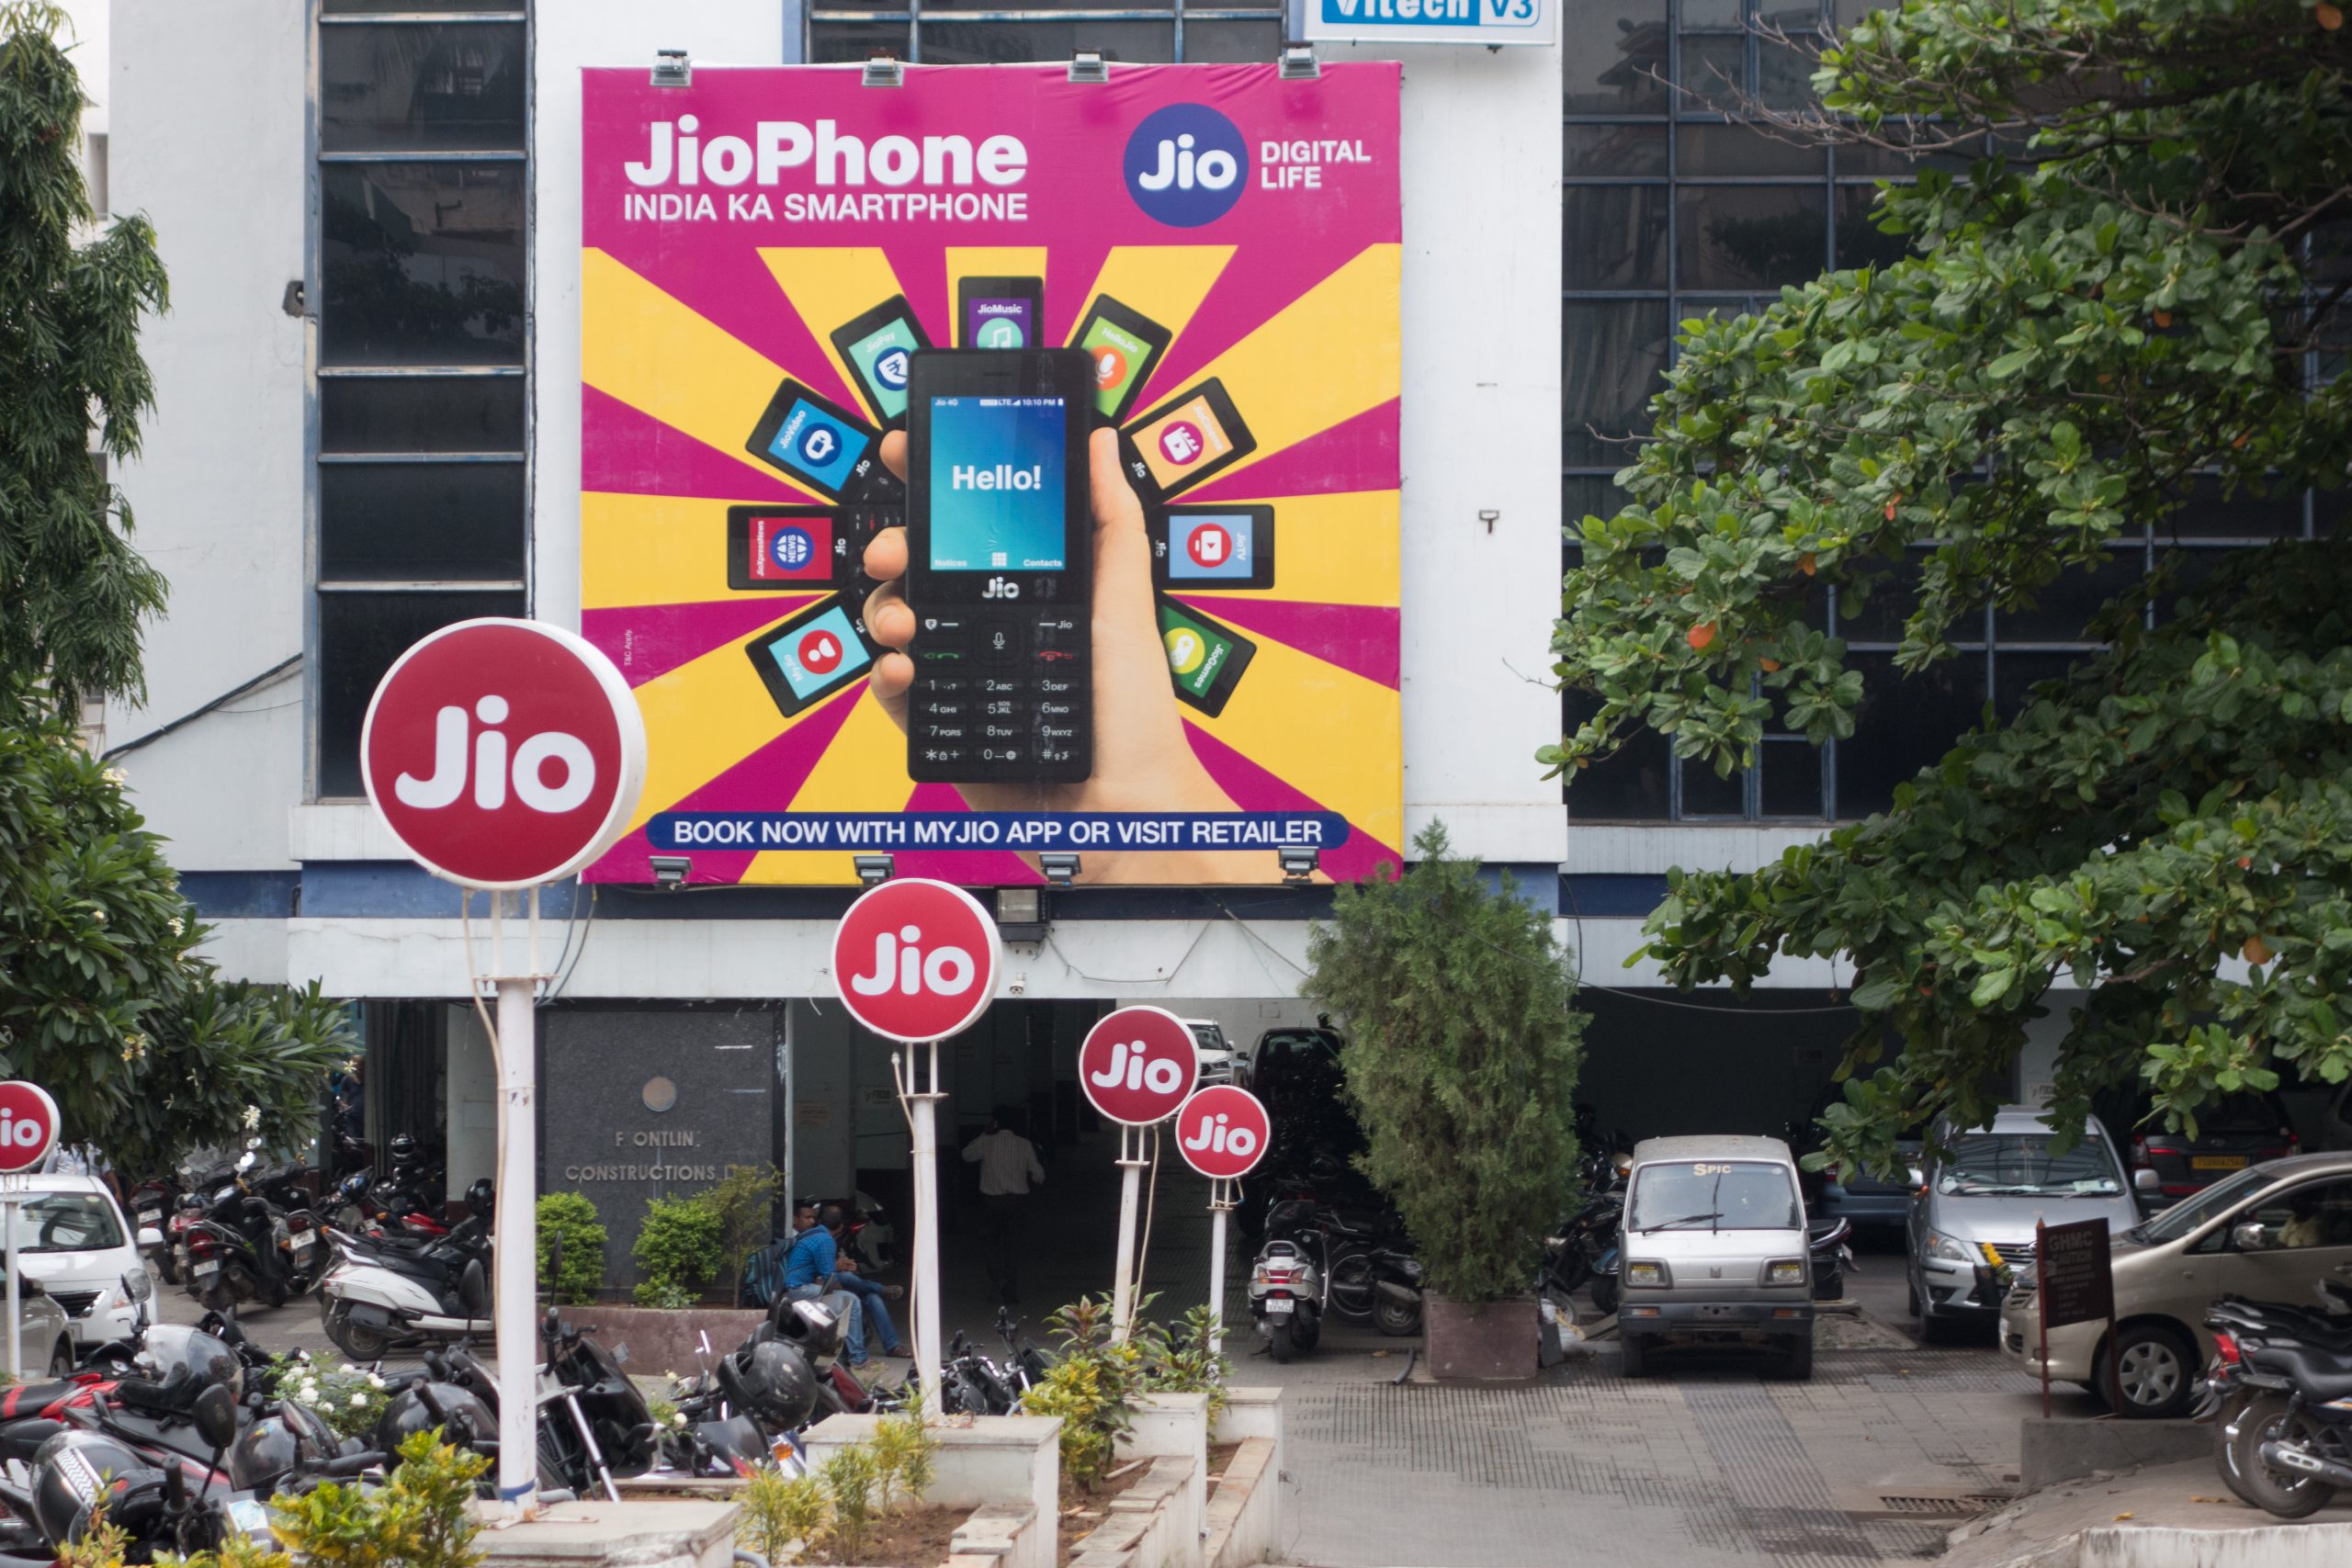 Intel Capital invests USD 254 million in Reliance’s Jio Platforms